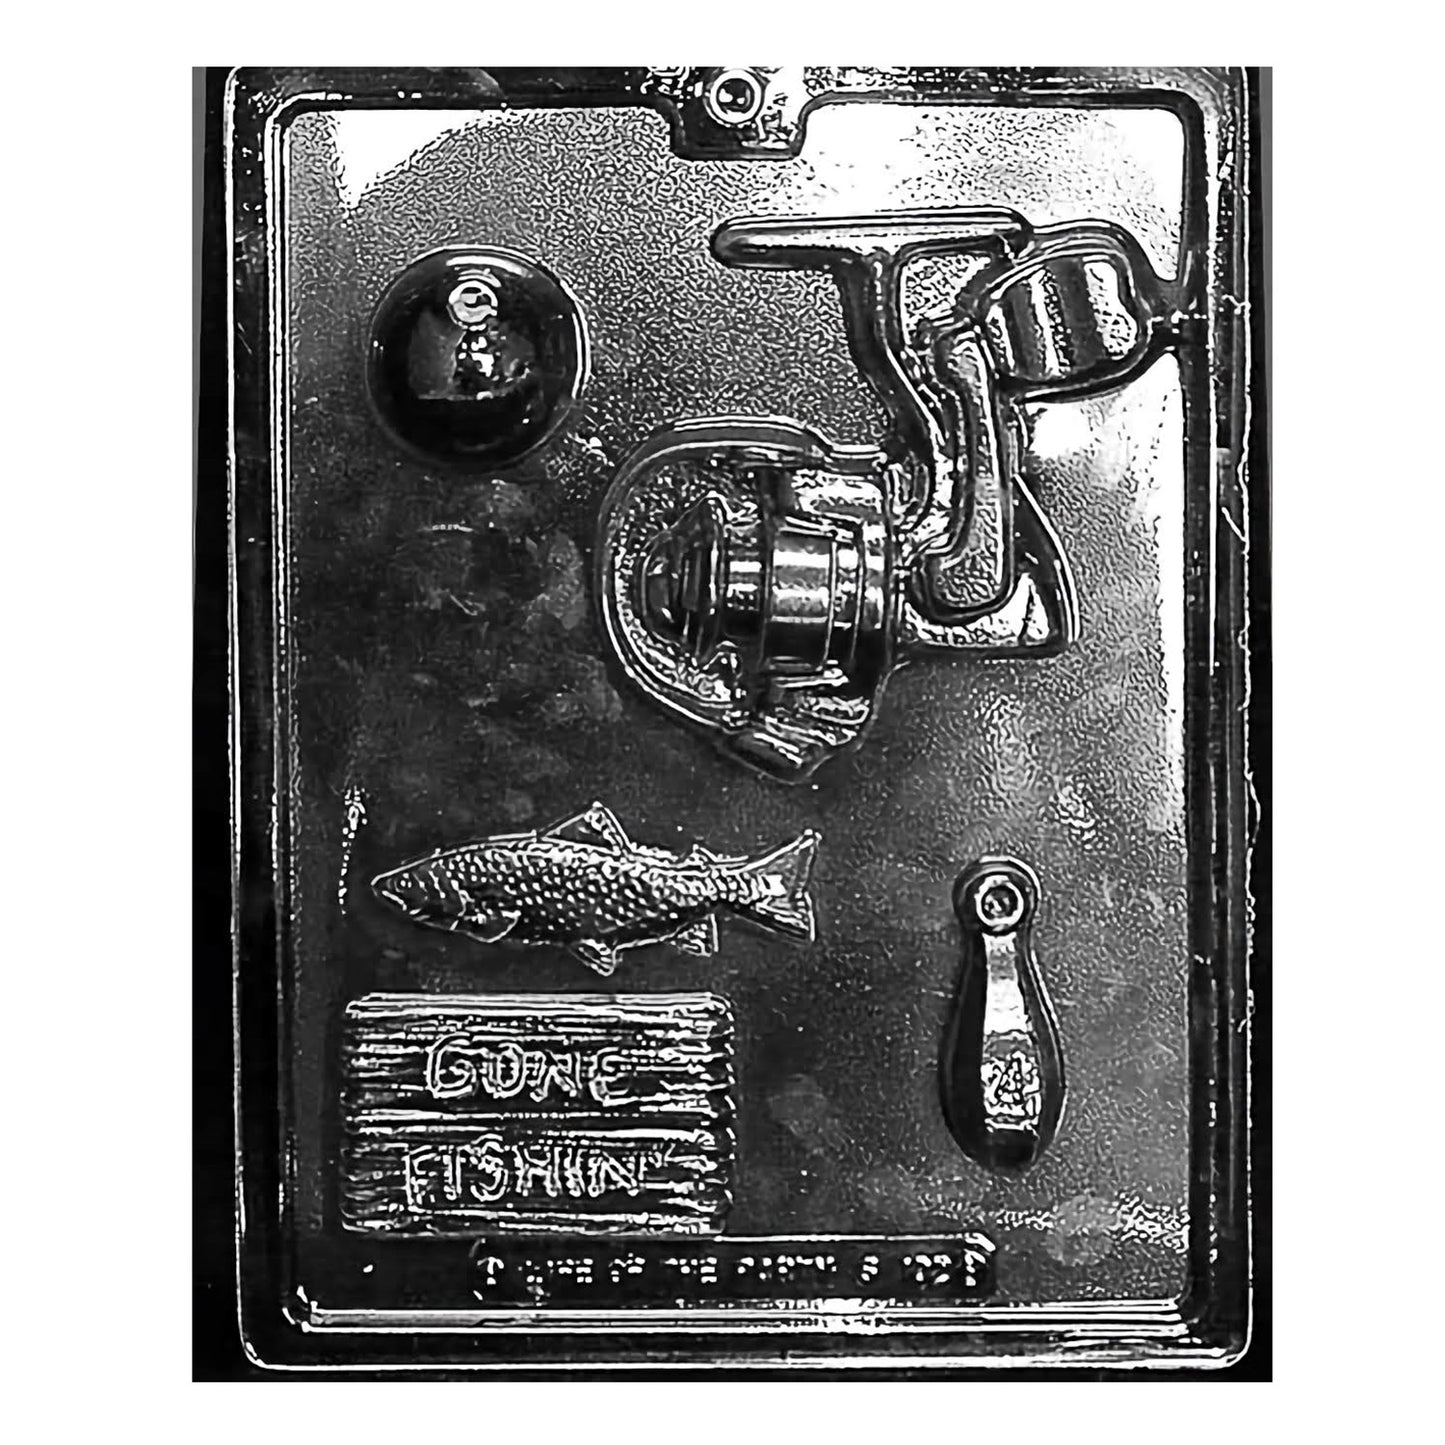 A detailed chocolate mold designed to create fishing-themed chocolates, featuring shapes of fish, fishing reels, baits, and a 'Gone Fishing' sign, perfect for anglers and outdoor enthusiasts.